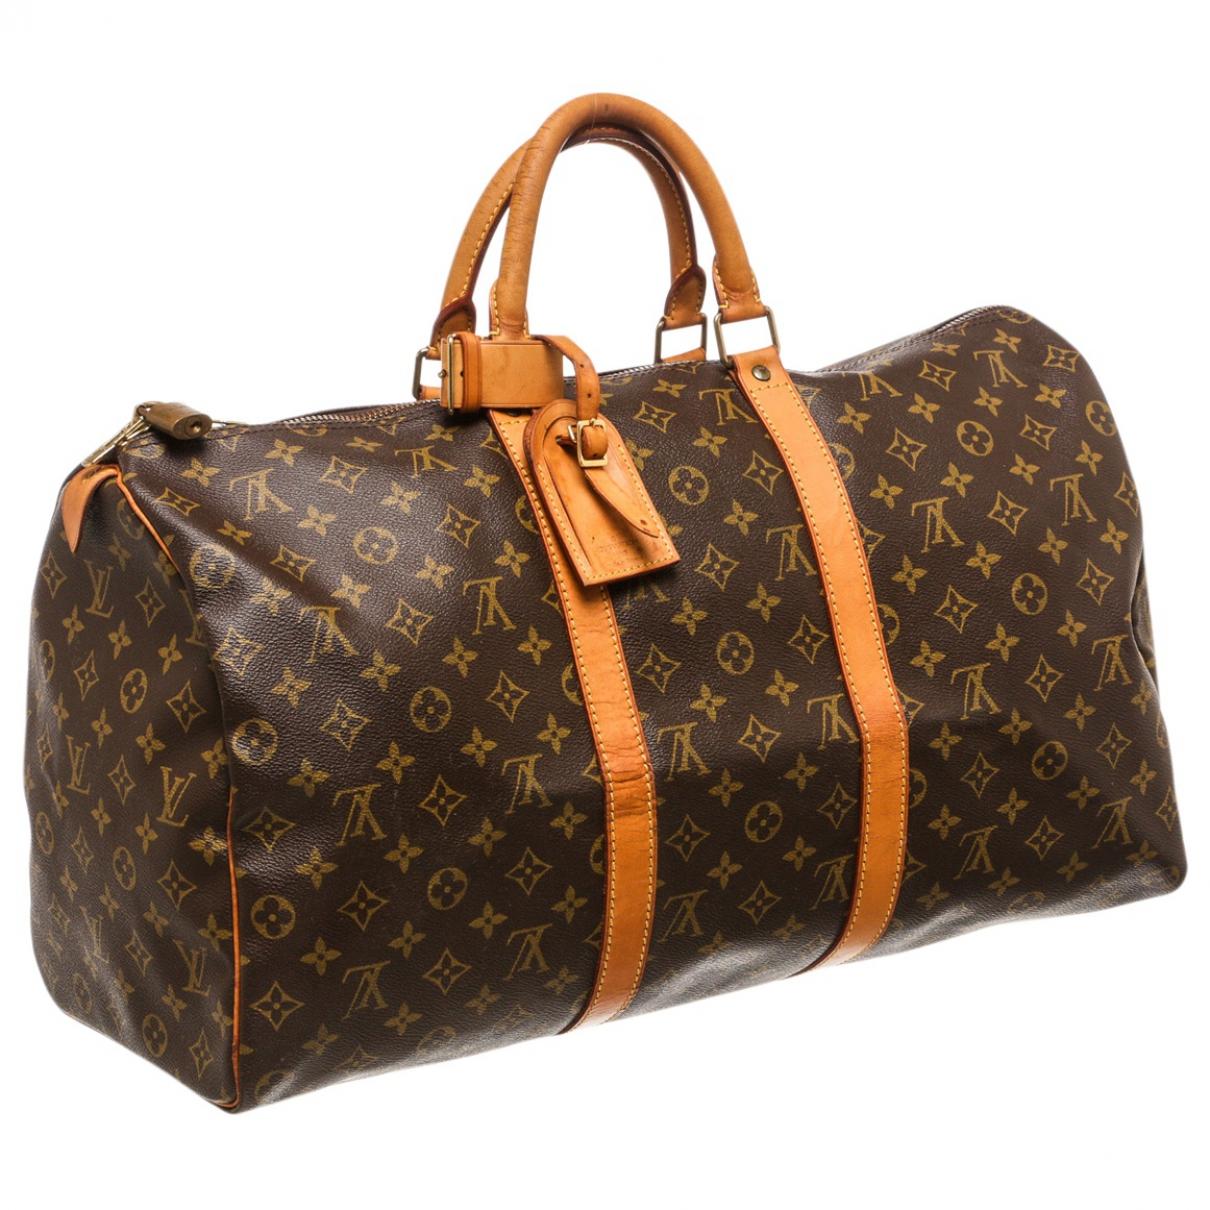 Lyst - Louis Vuitton Pre-owned Keepall Travel Bag in Brown